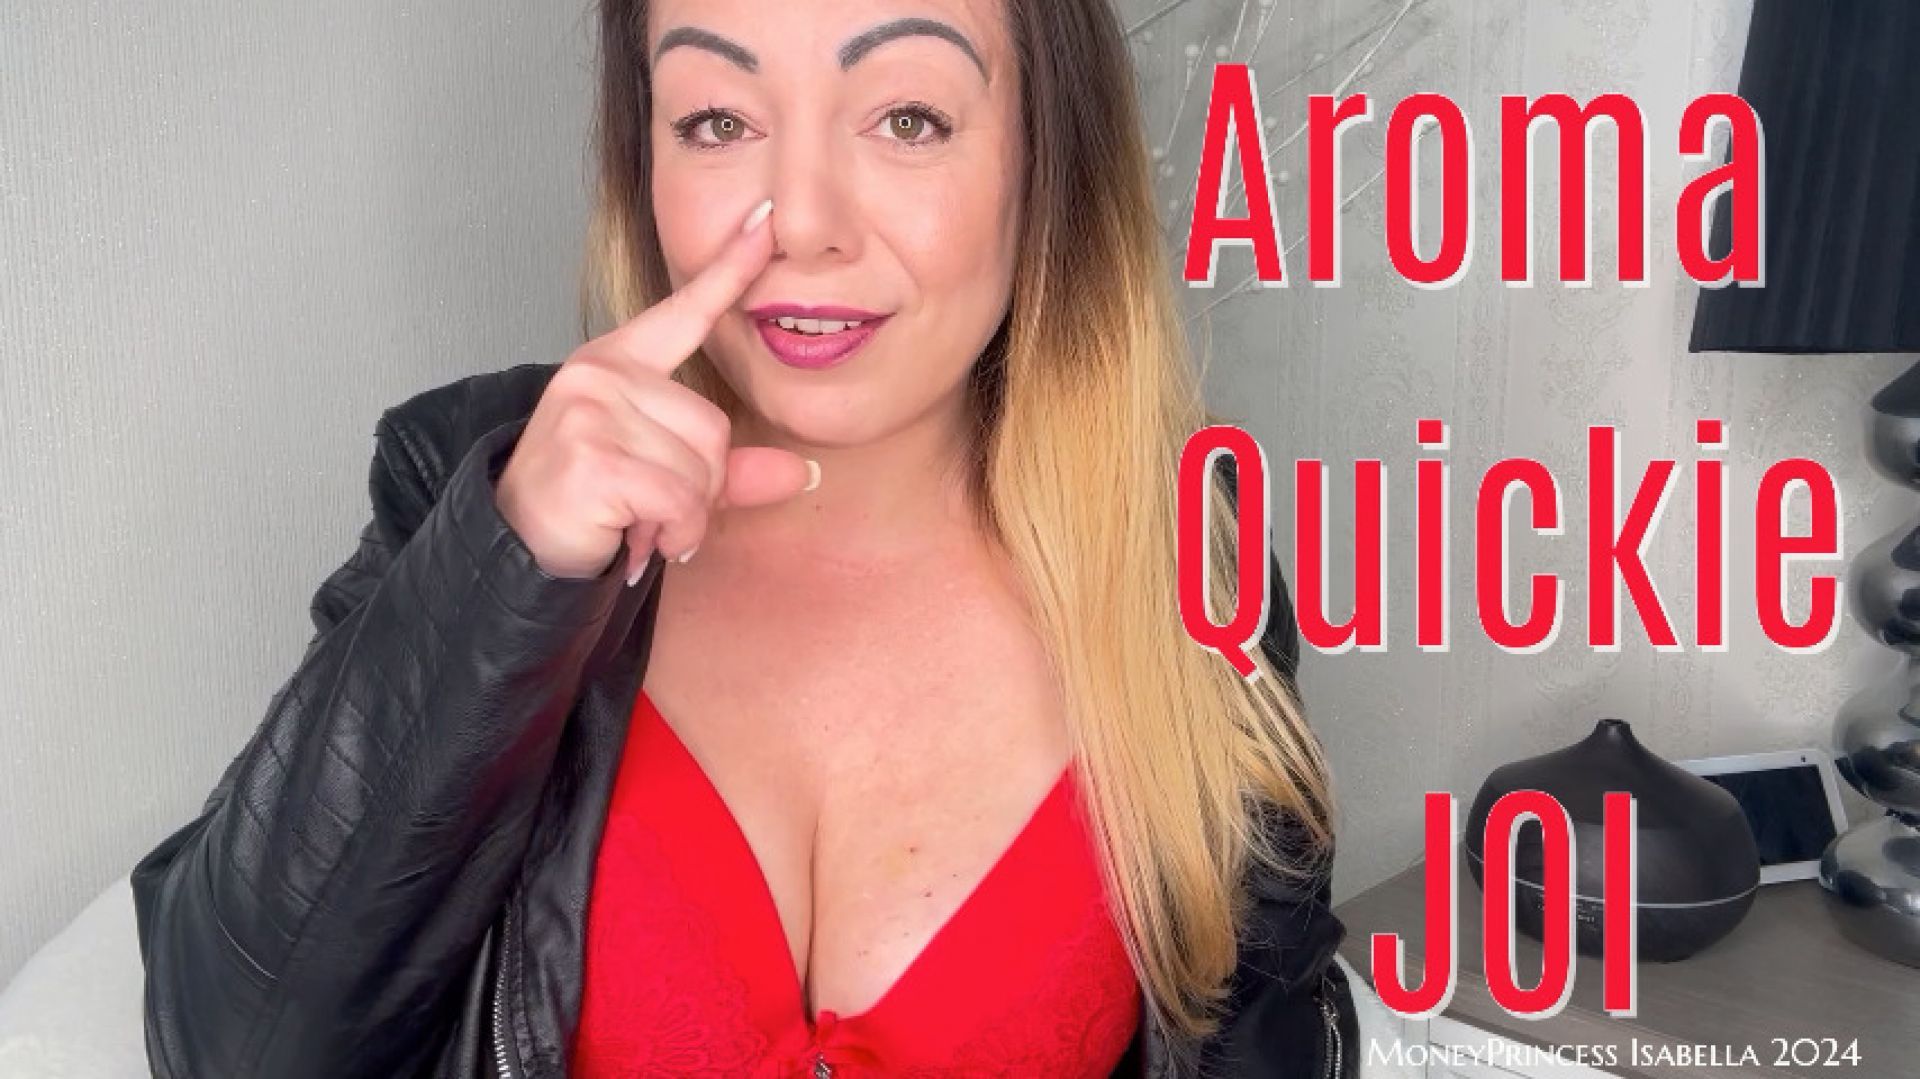 Aroma Quickie JOI by MoneyPrincess Isabella